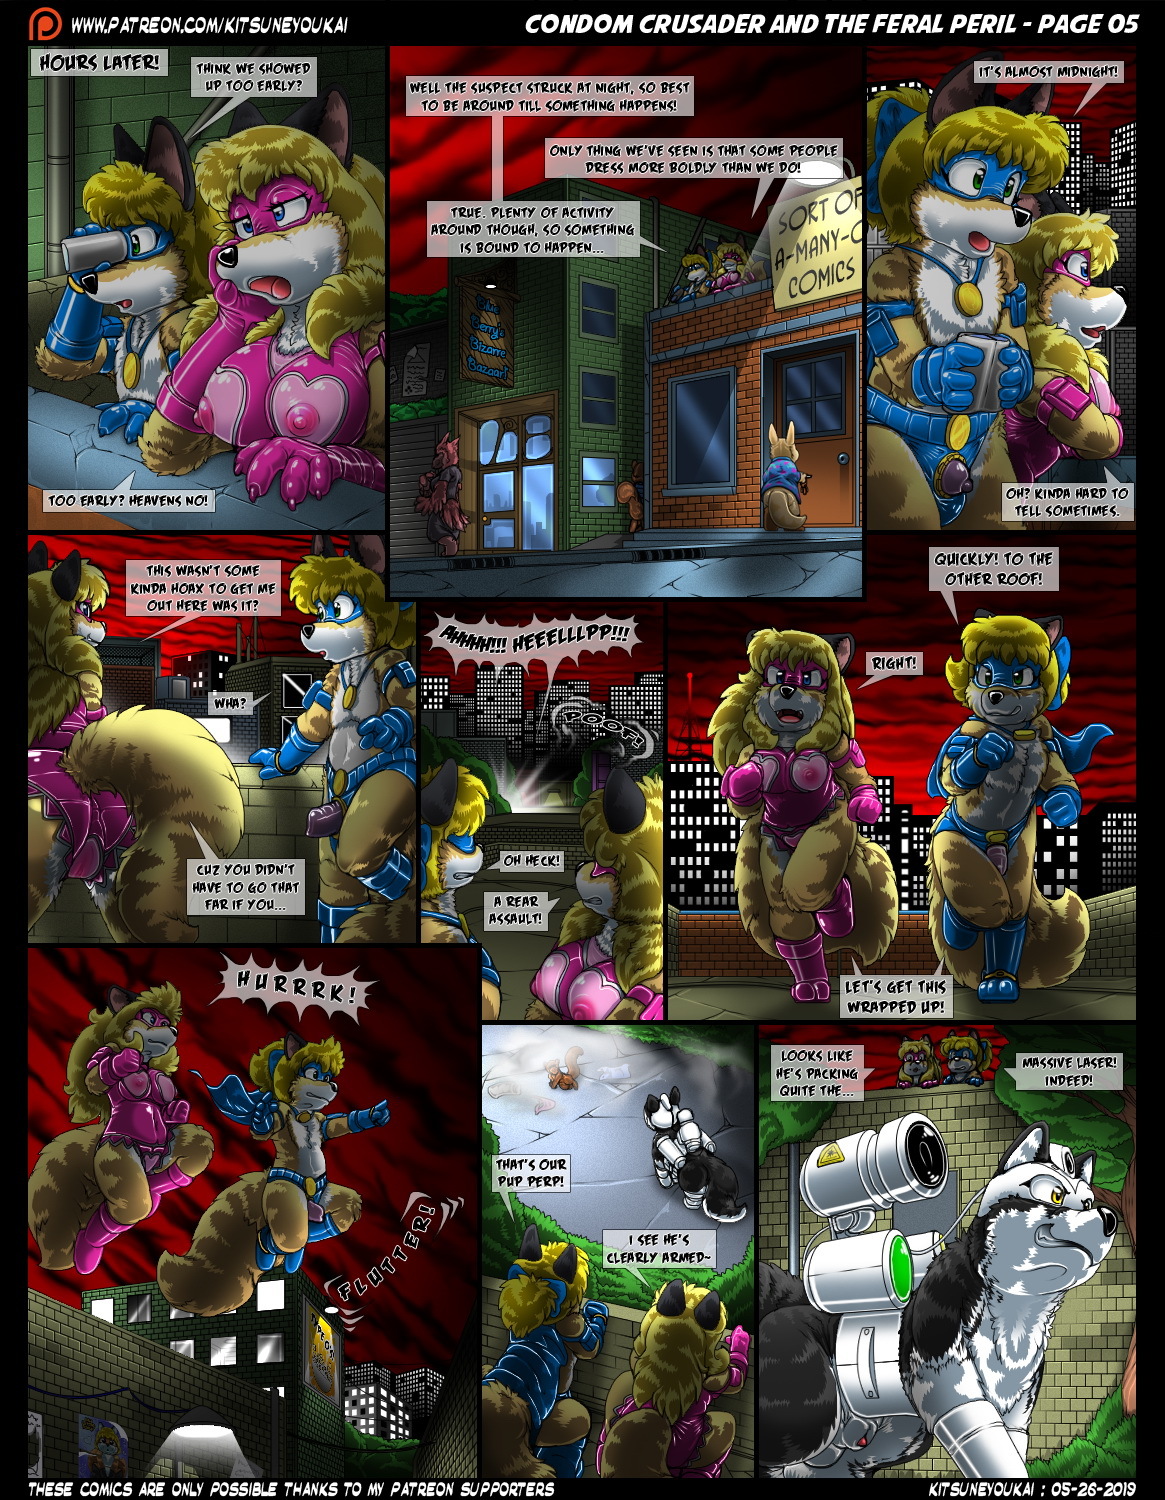 Condom Crusader and the Feral Peril - Page 5